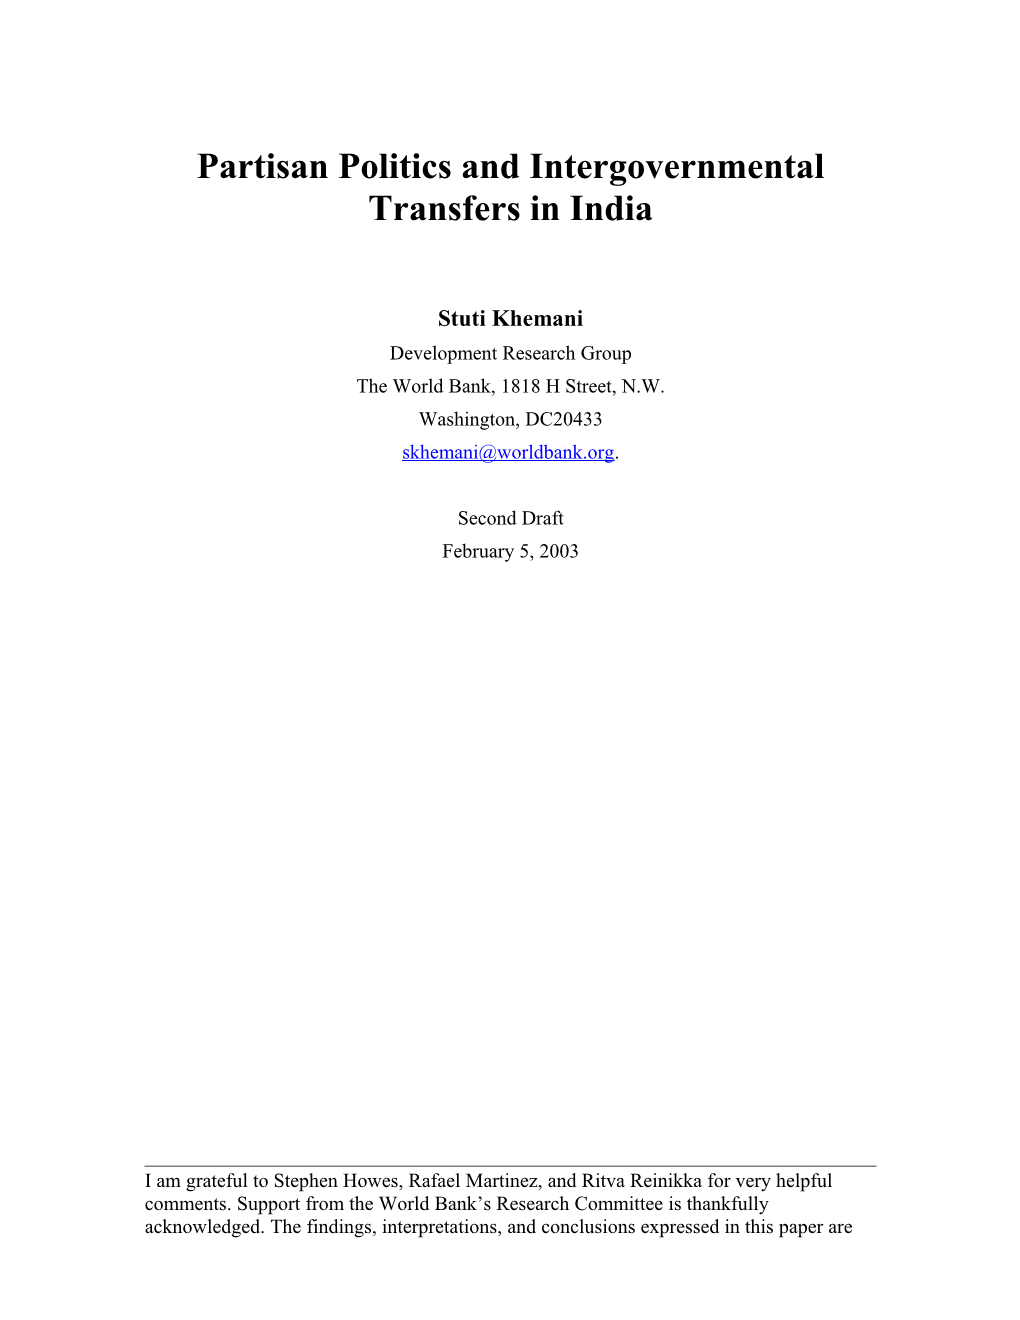 Partisan Politics and Intergovernmental Transfers in India